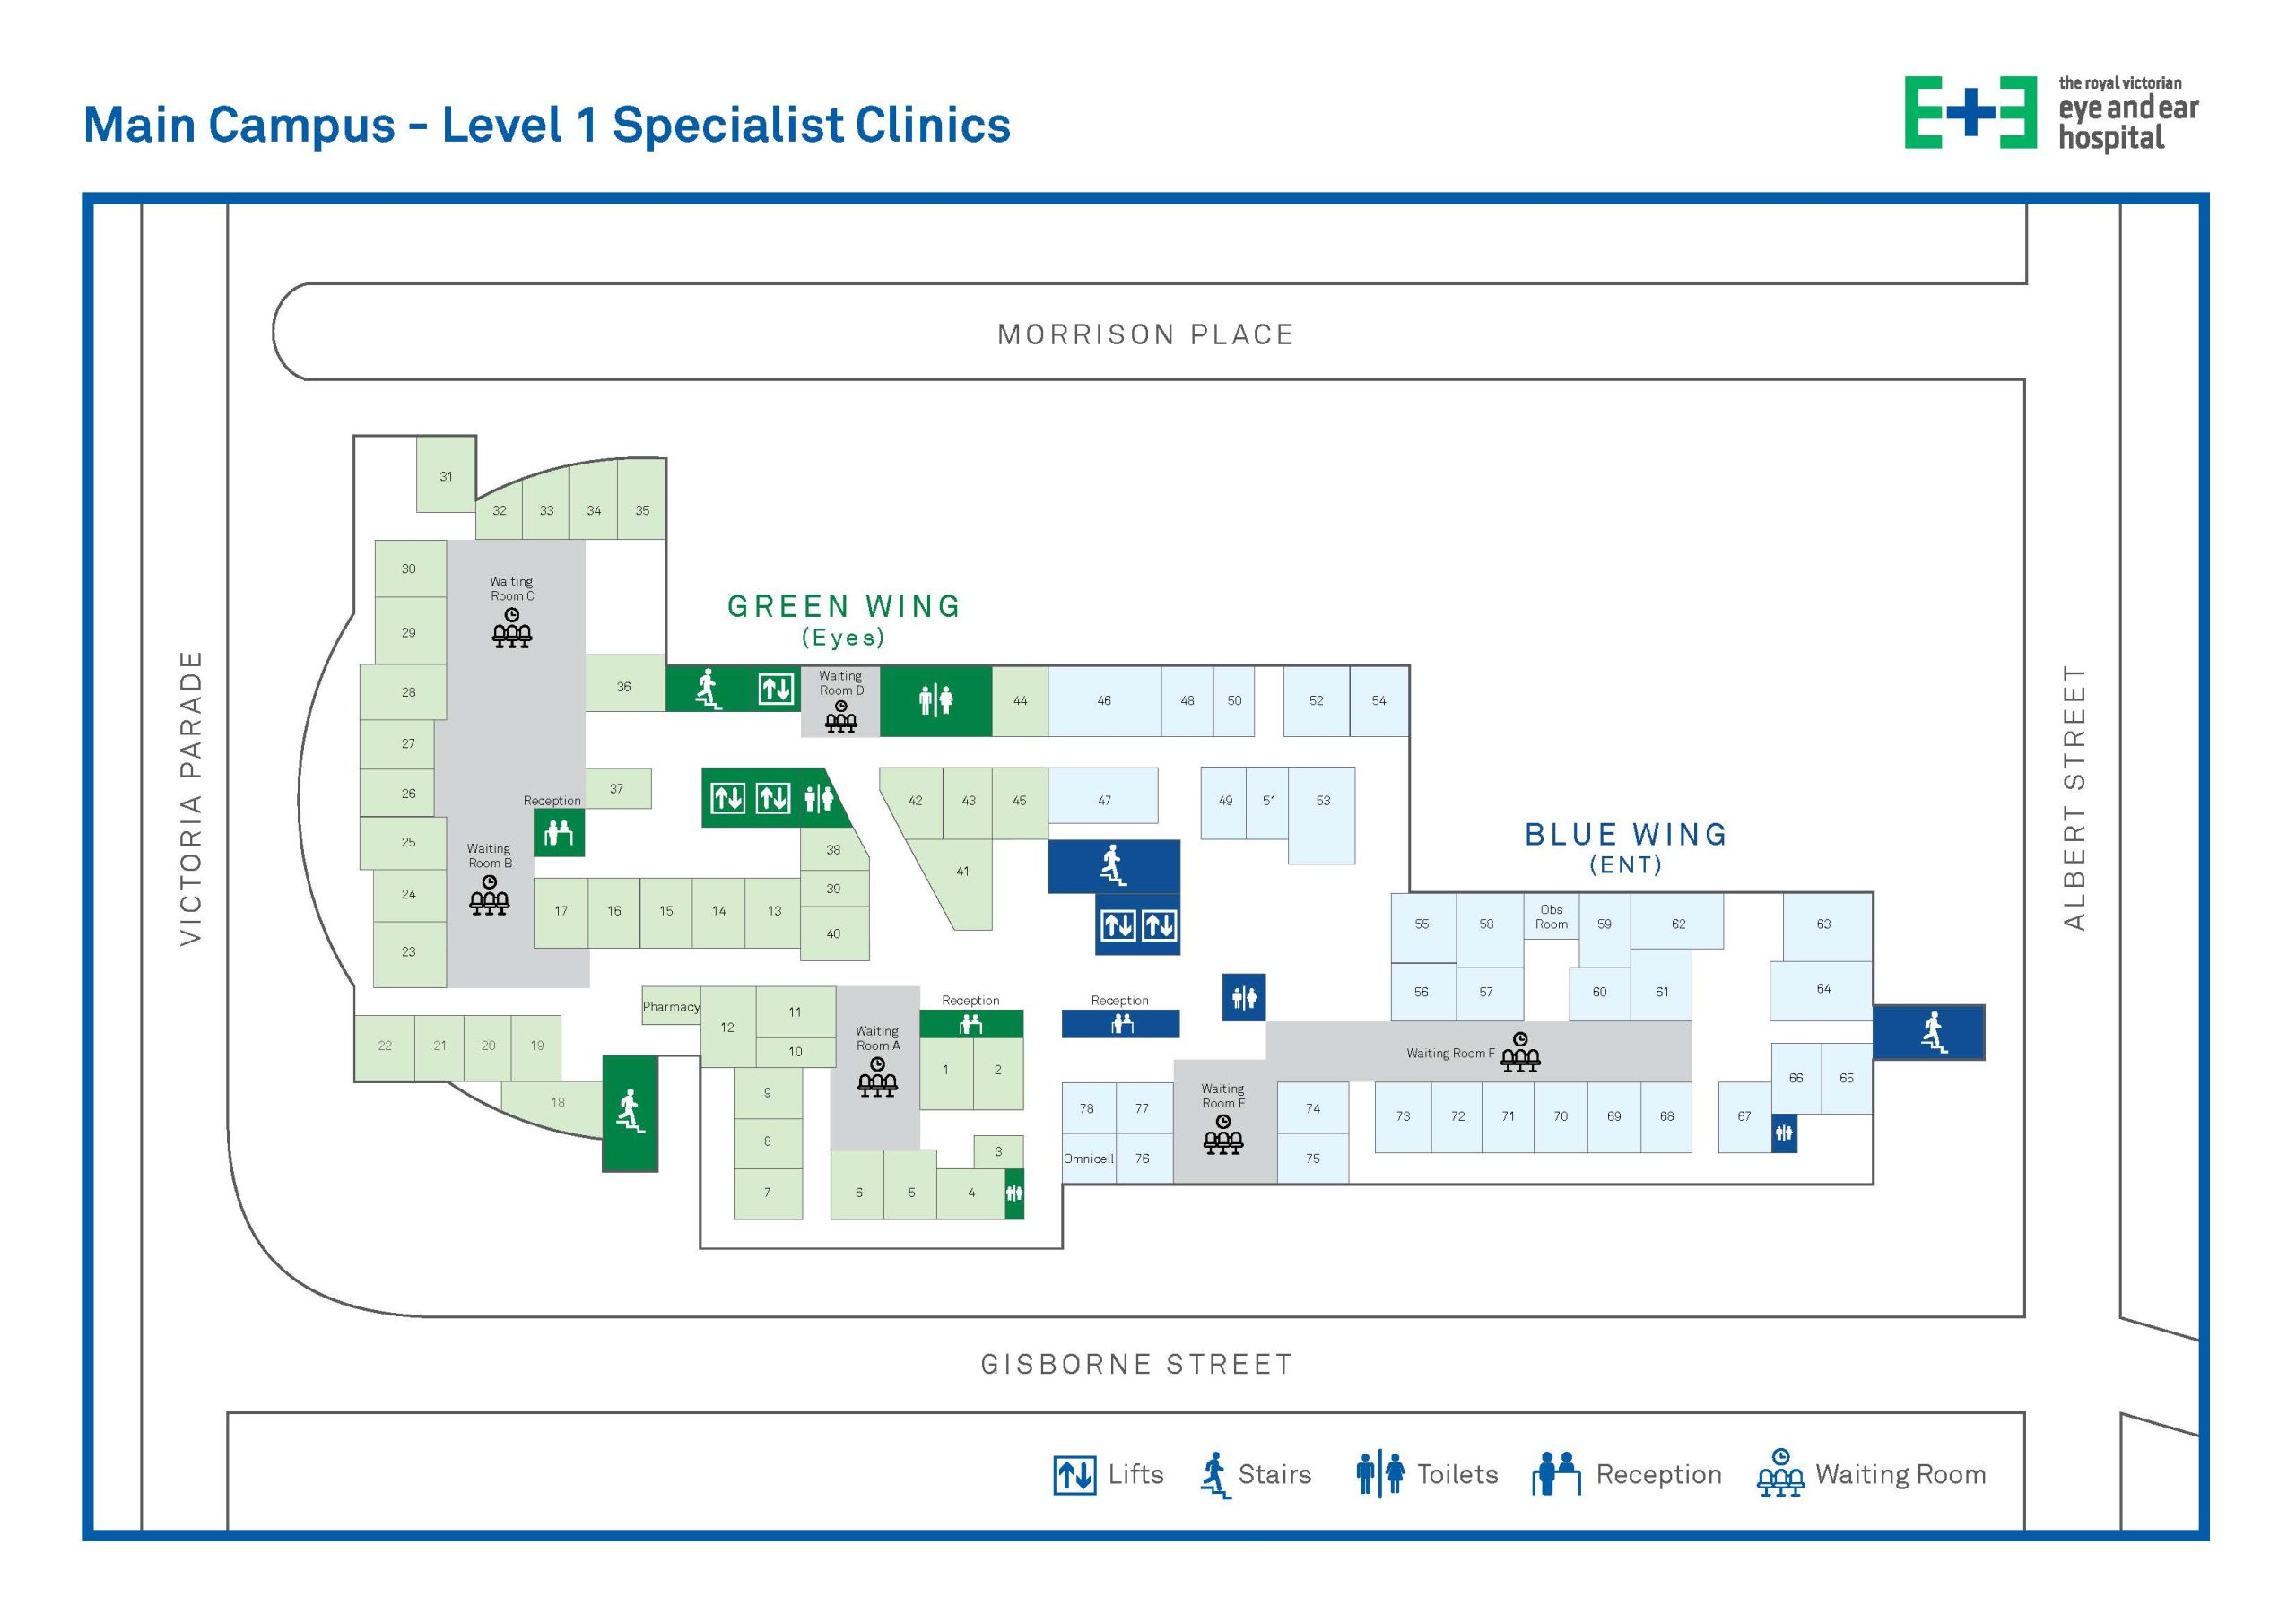 Simplified map of level 1 of the hospital.